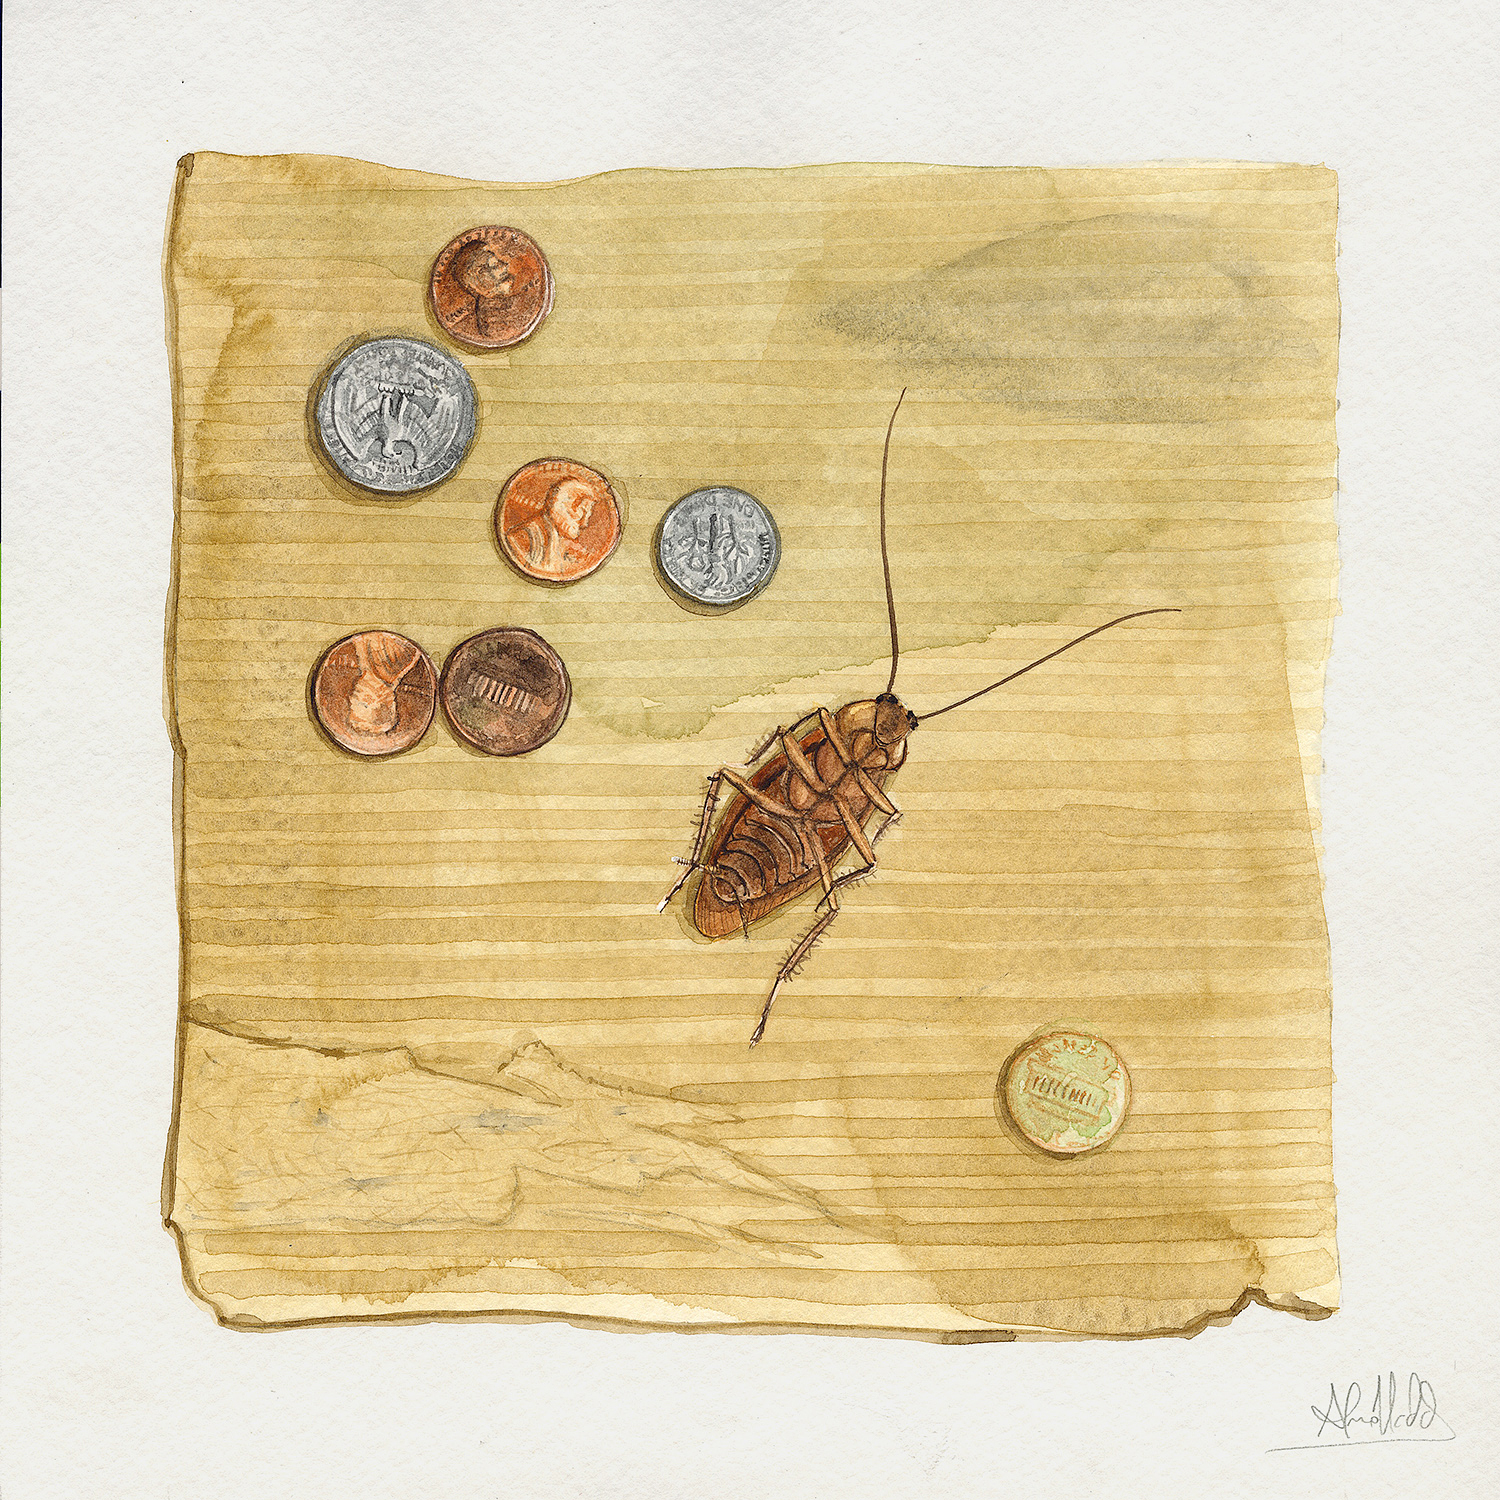 Alvaro Naddeo, Forty Cents, 2015. Watercolor on paper, 9 x 9 in.